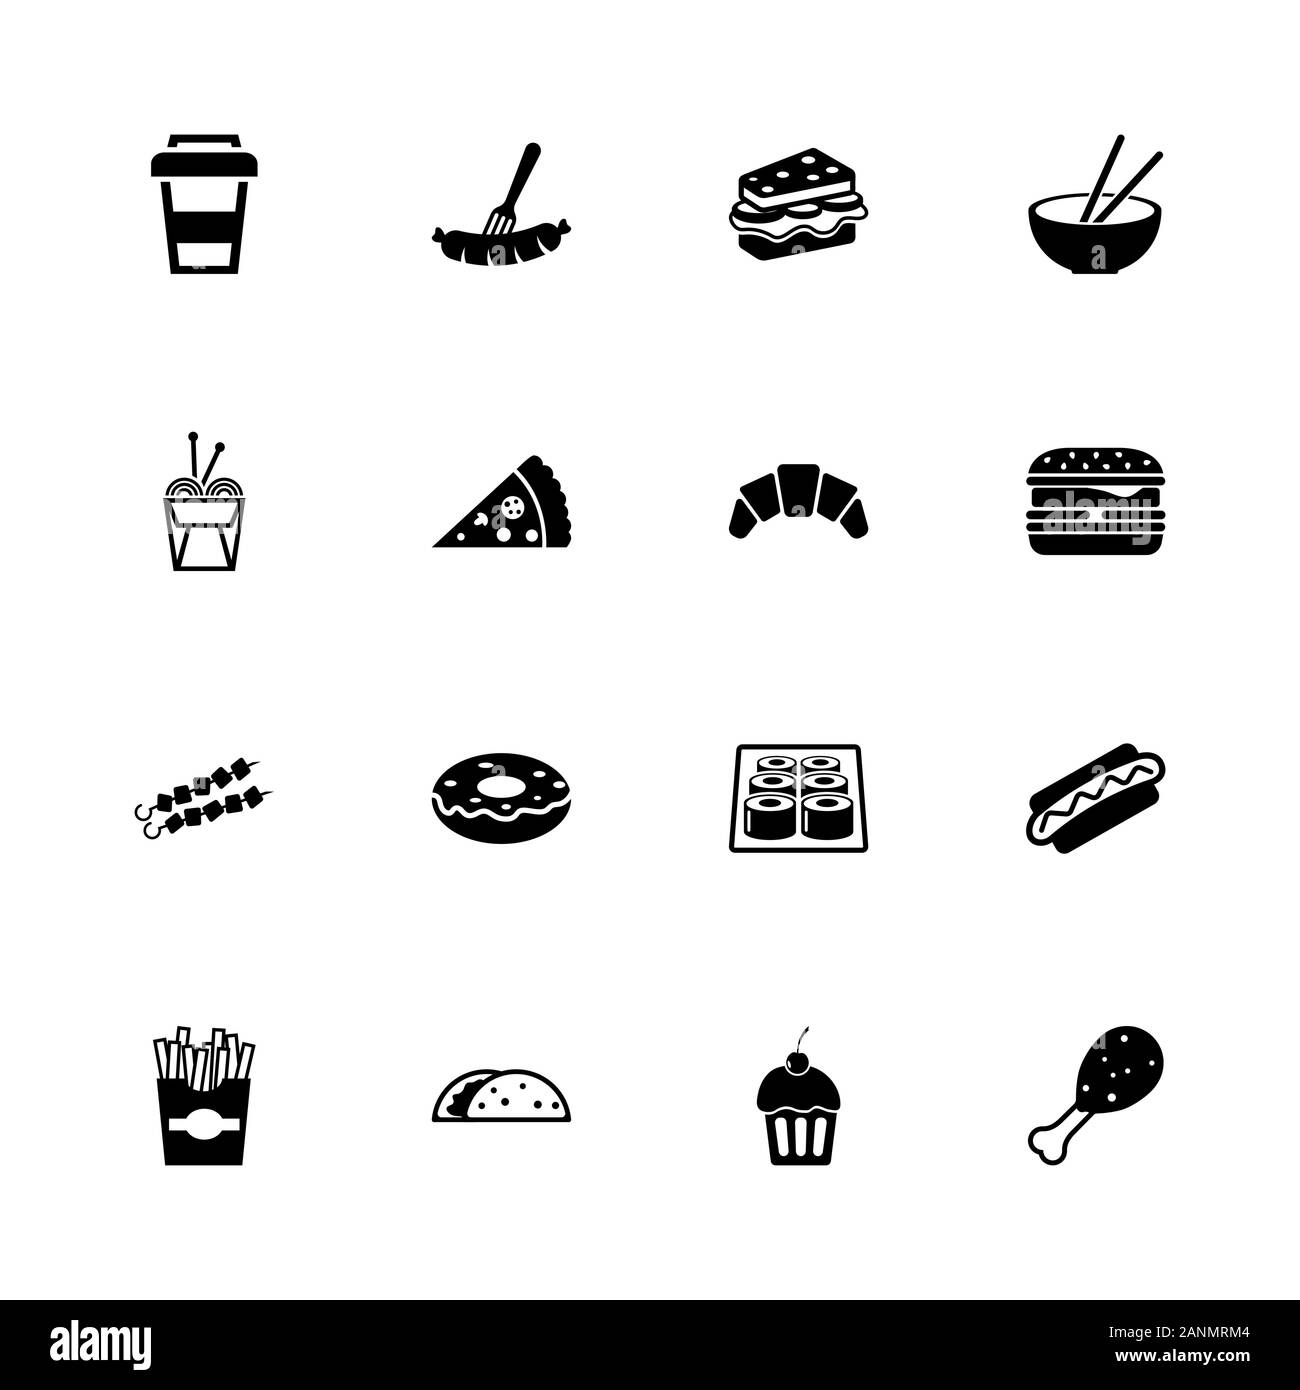 Fast Food icons - Expand to any size - Change to any colour. Flat Vector Icons - Black Illustration on White Background. Stock Vector